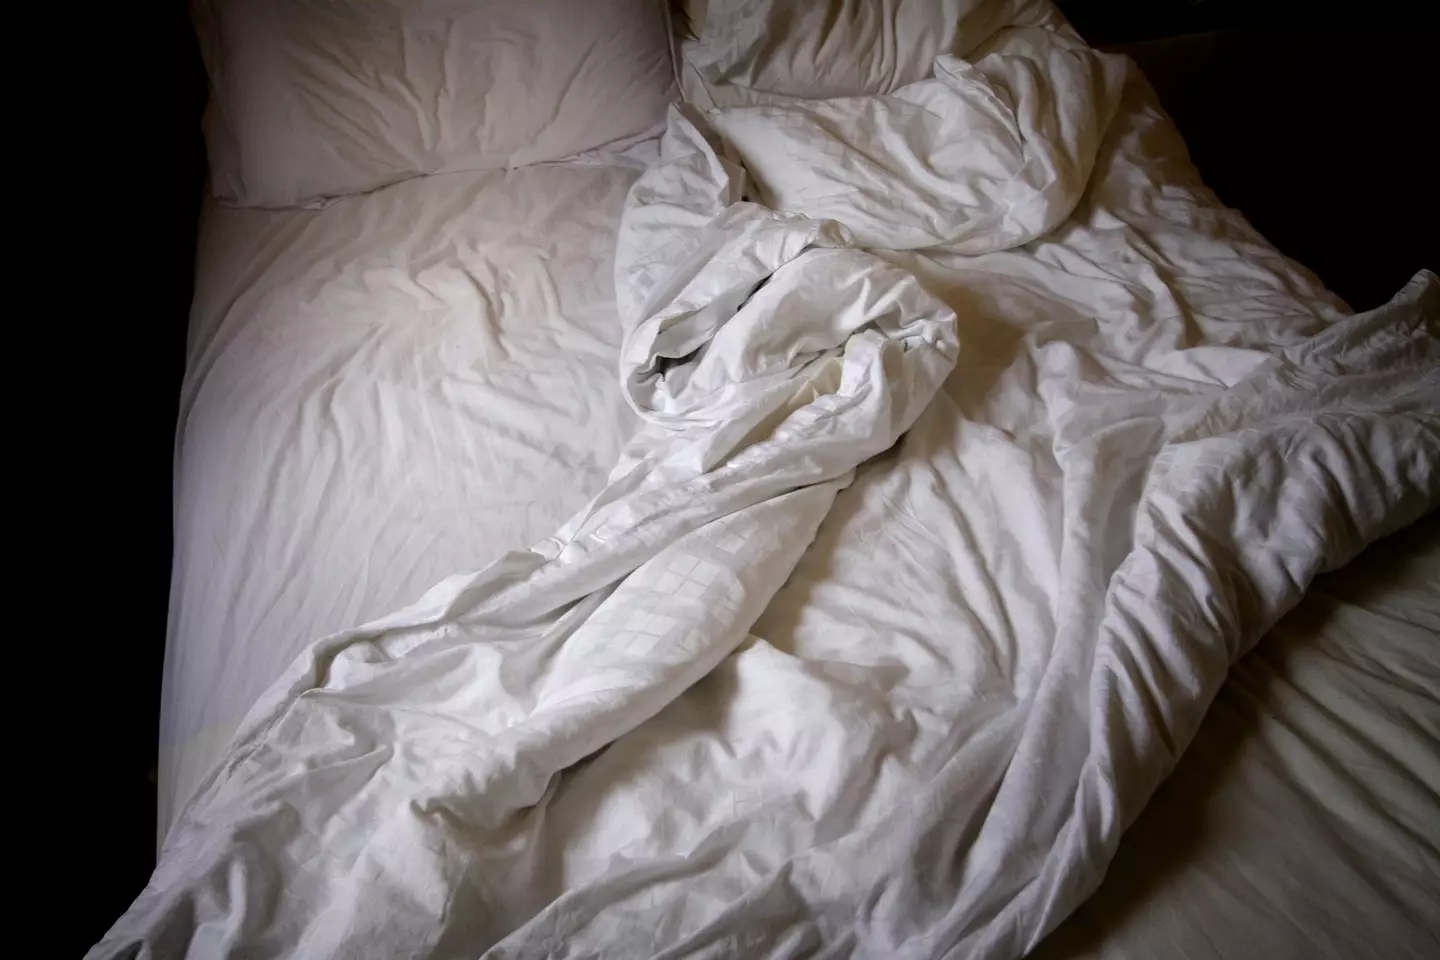 How often do you change your bed sheets?